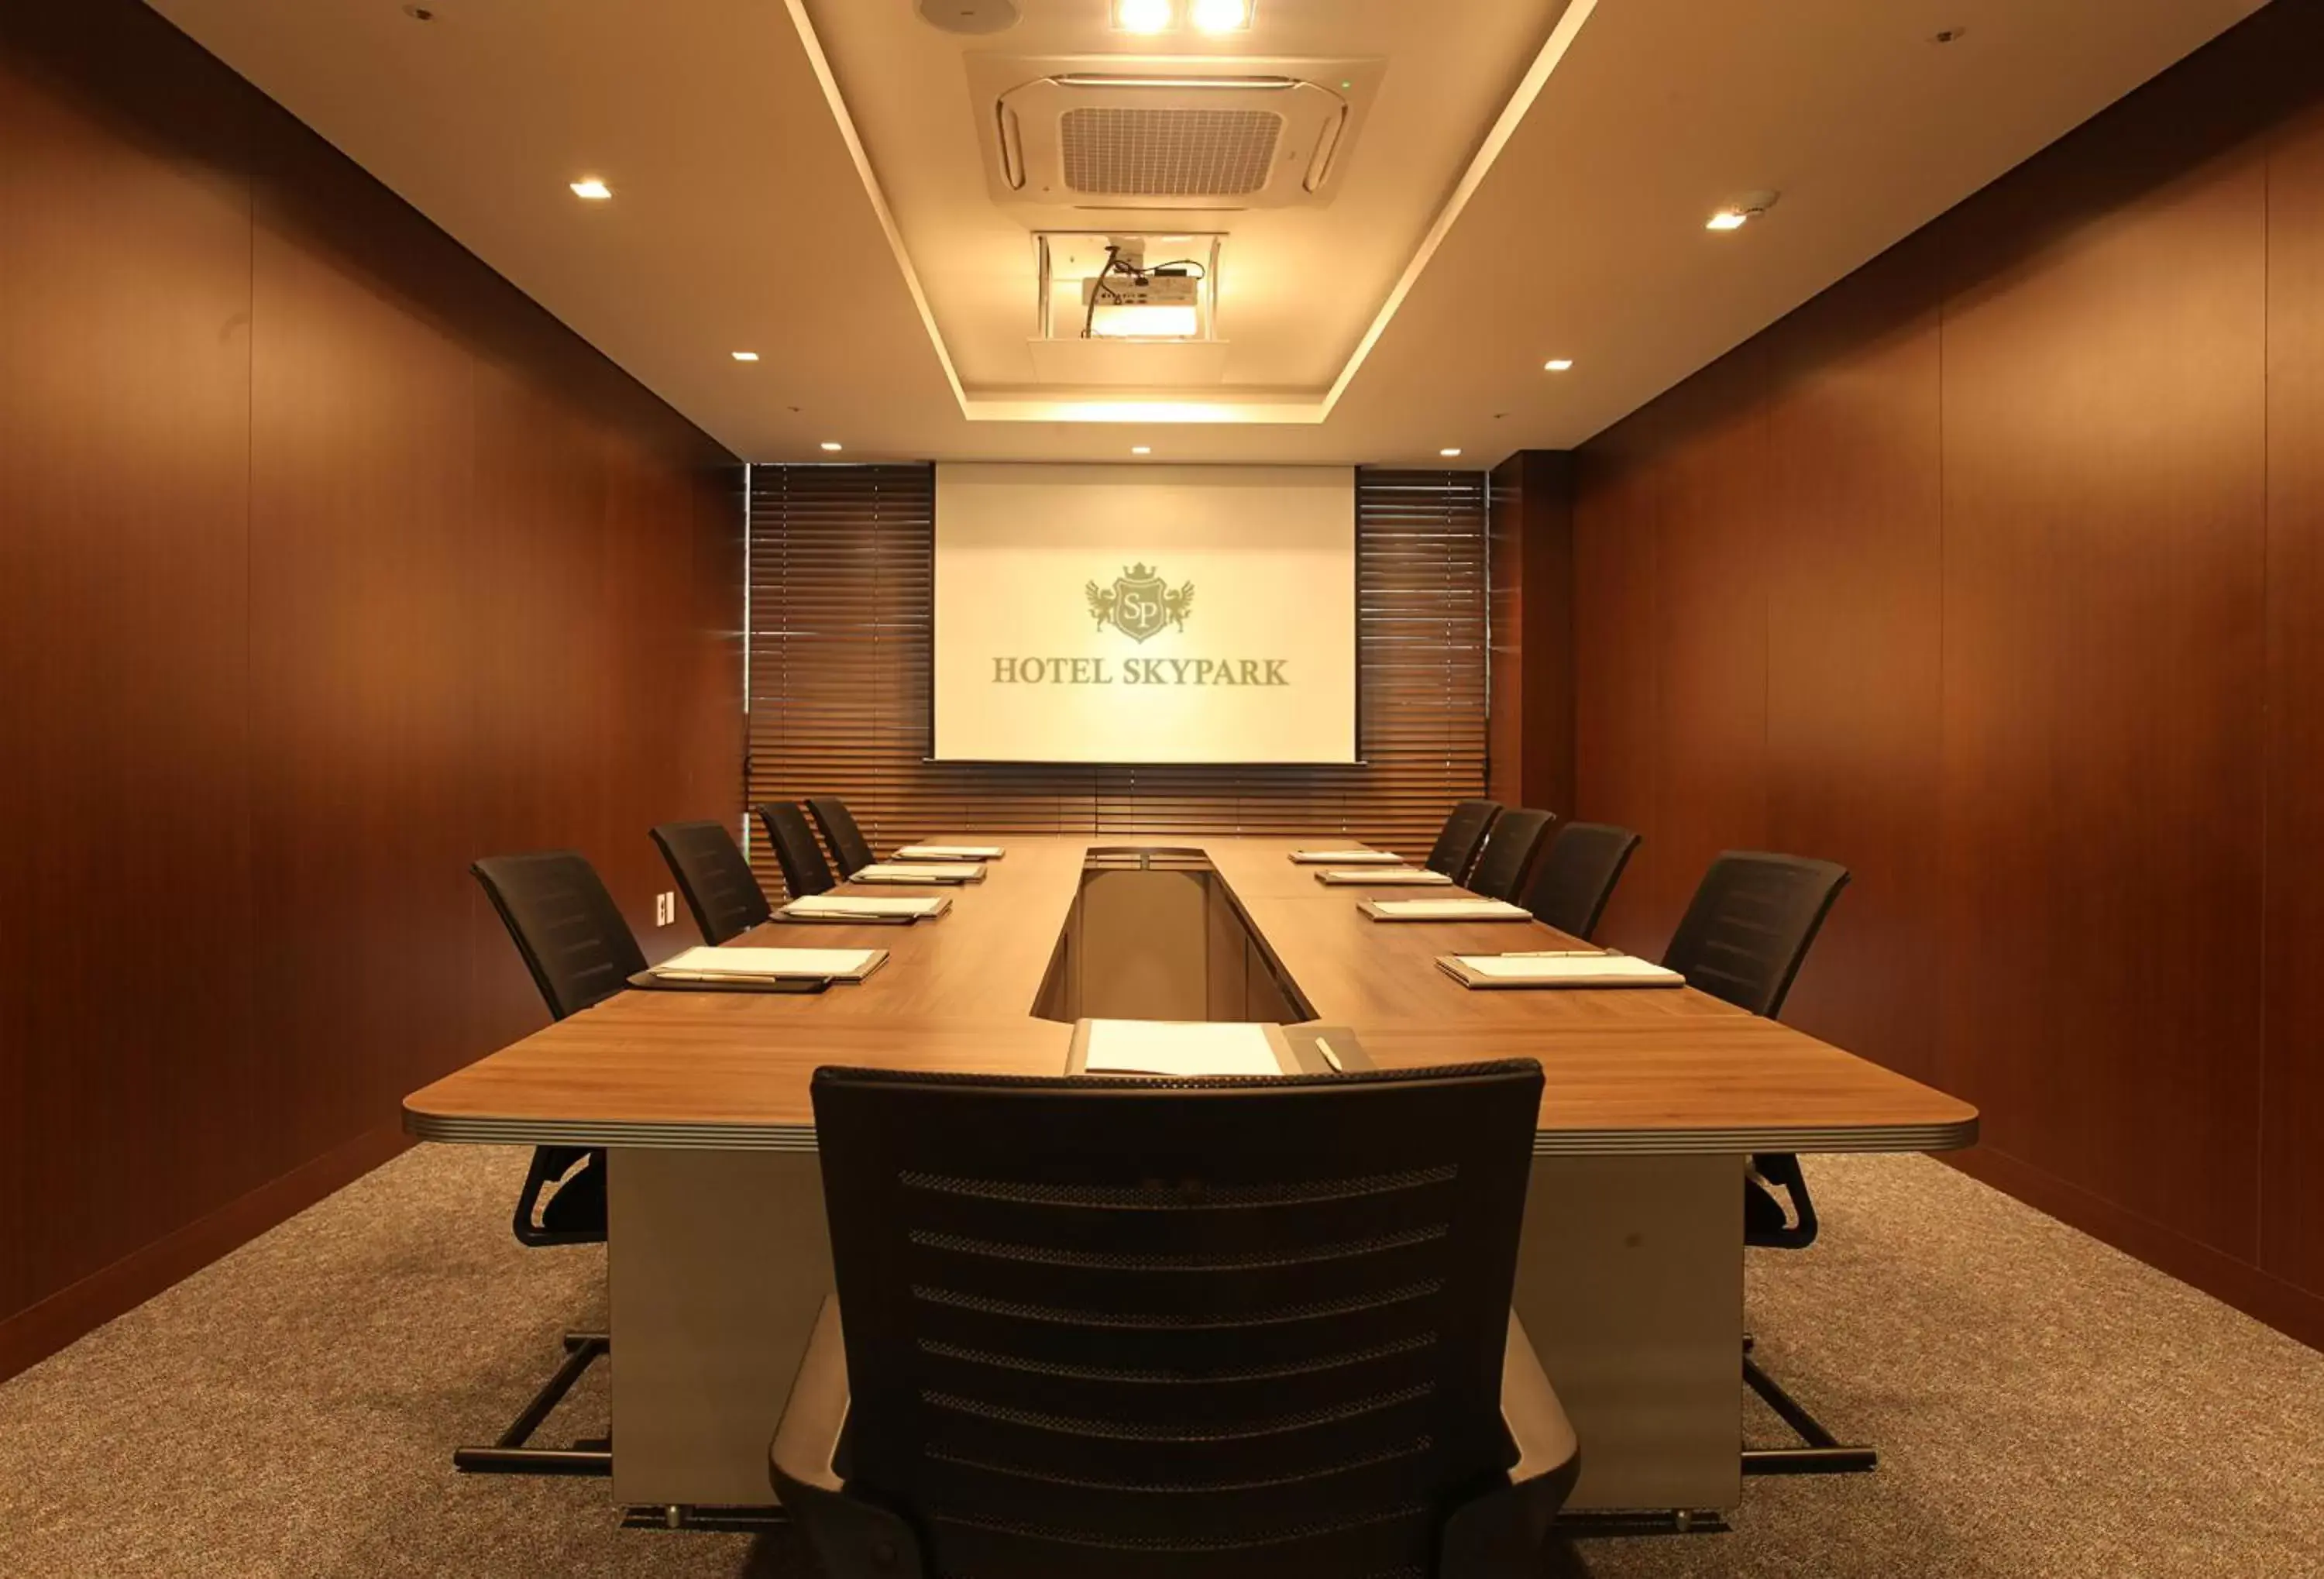 Meeting/conference room, Business Area/Conference Room in Hotel Skypark Kingstown Dongdaemun